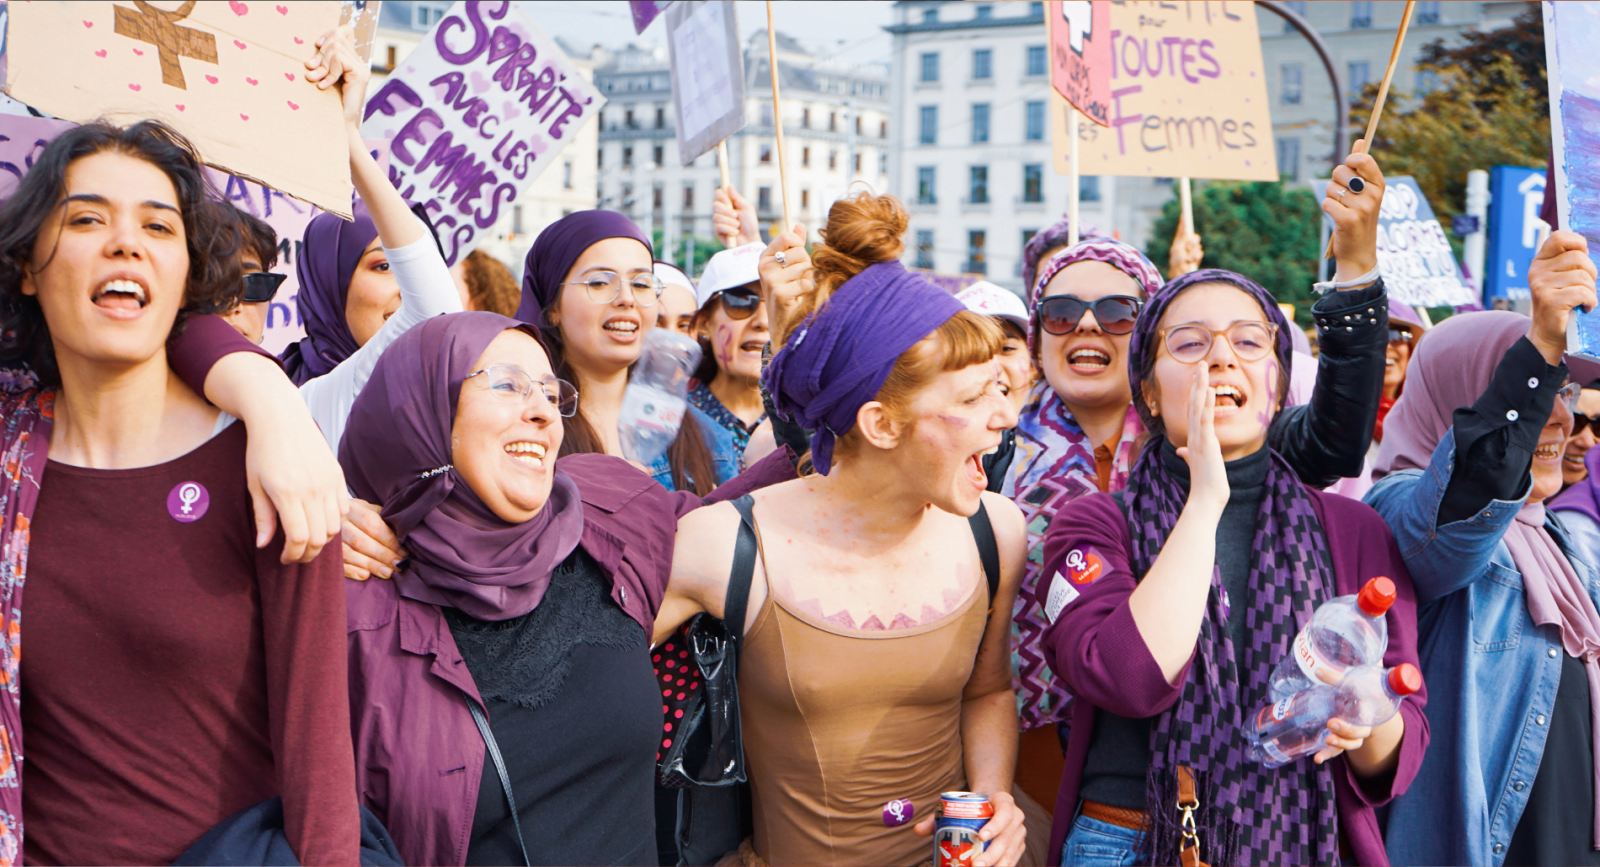 Members of 'Les Foulards Violets' (The Purple Scarves), a collective of Muslim and and non-Muslim women who stand in solidarity with those who wear the headscarf, at a protest in Geneva, Switzerland.